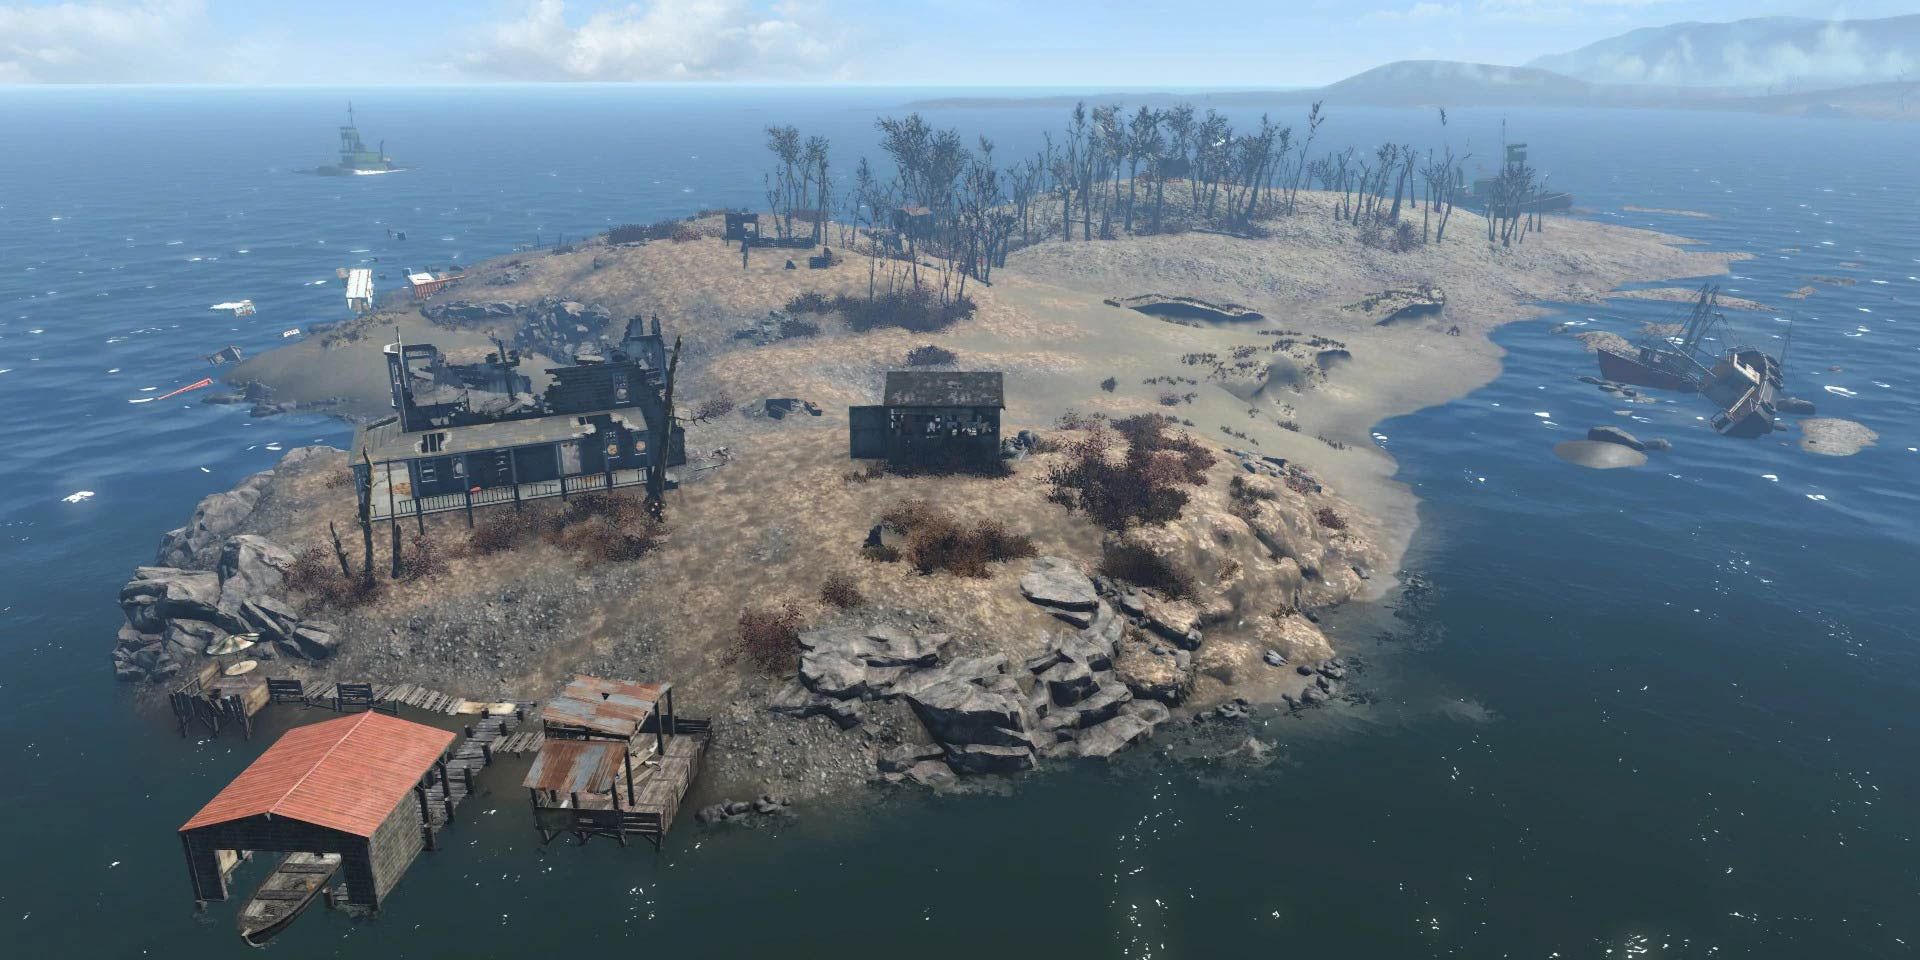 Spectacle Island in Fallout 4; a huge island in the middle of the ocean.